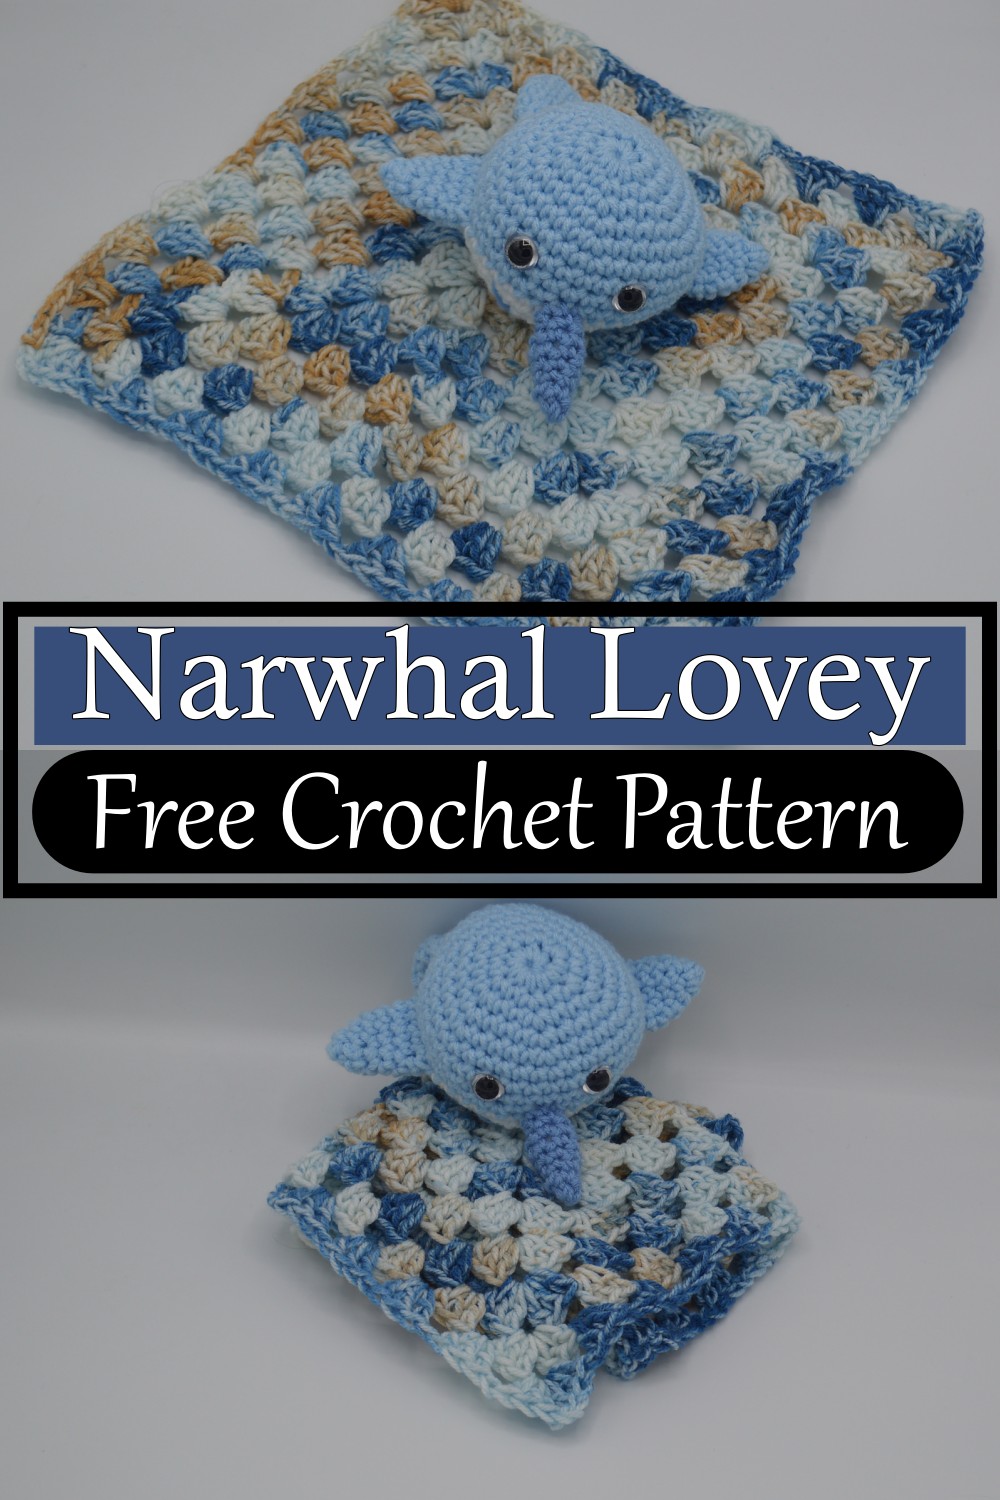 Narwhal Lovey